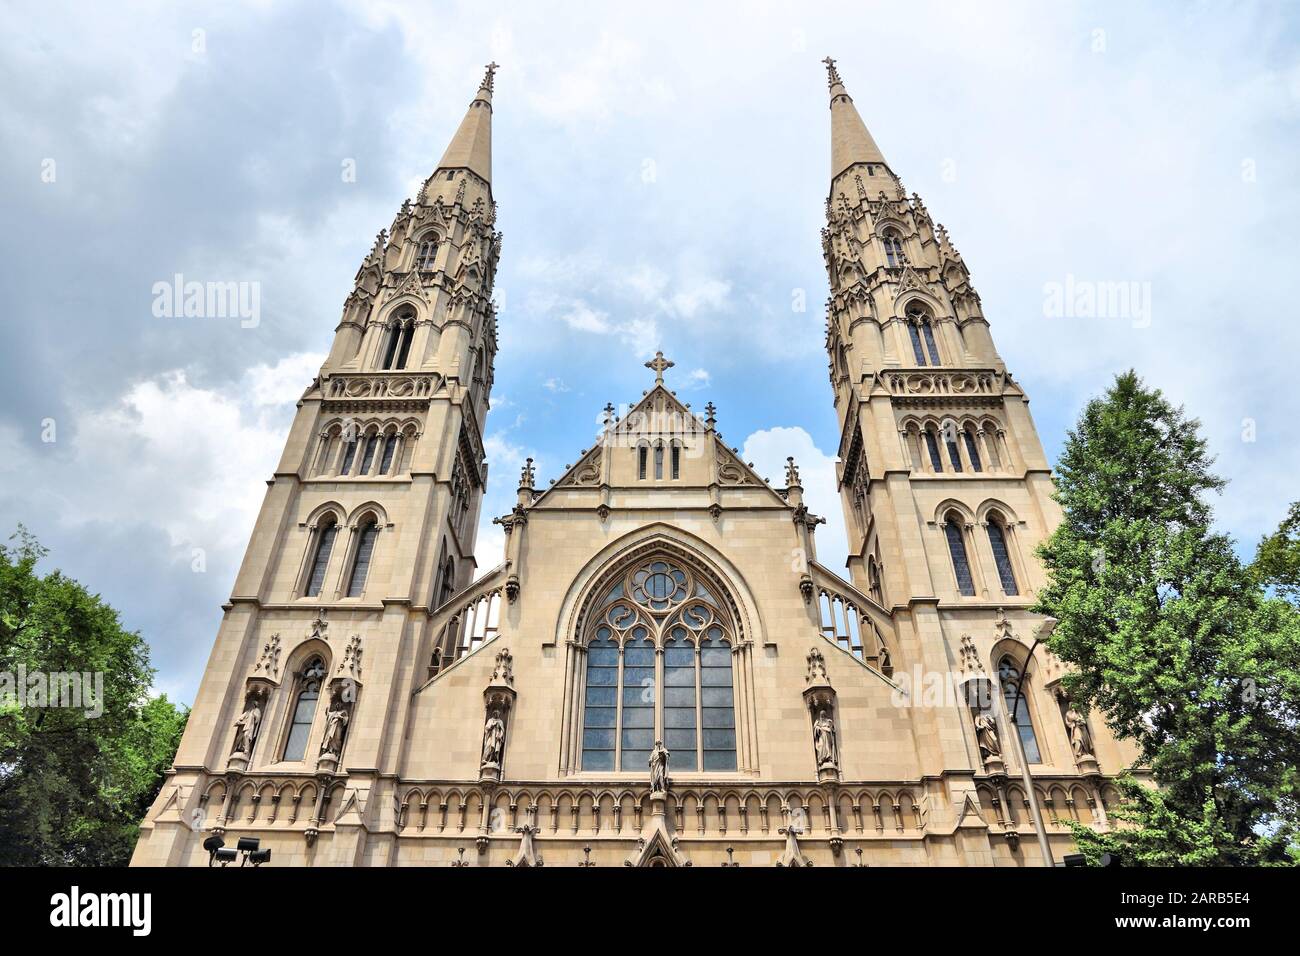 Pittsburgh city, Pennsylvania. Saint Paul Cathedral - Roman catholic church in Gothic revival style. Stock Photo